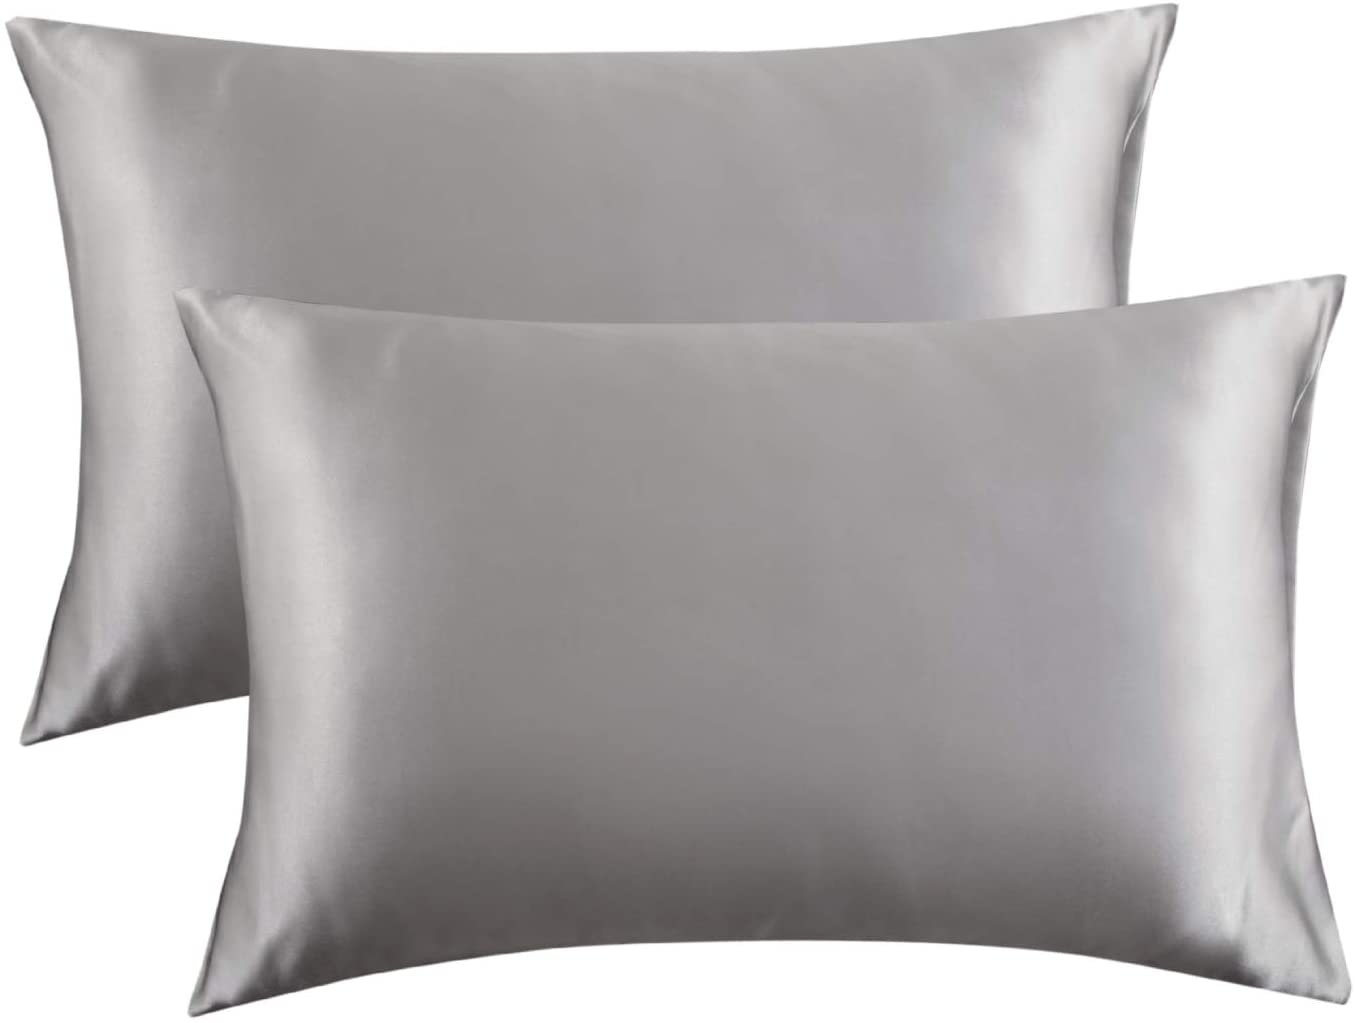 Bedsure Satin Pillowcase for Hair and Skin, 2-Pack - Queen Size (20x30  inches) P